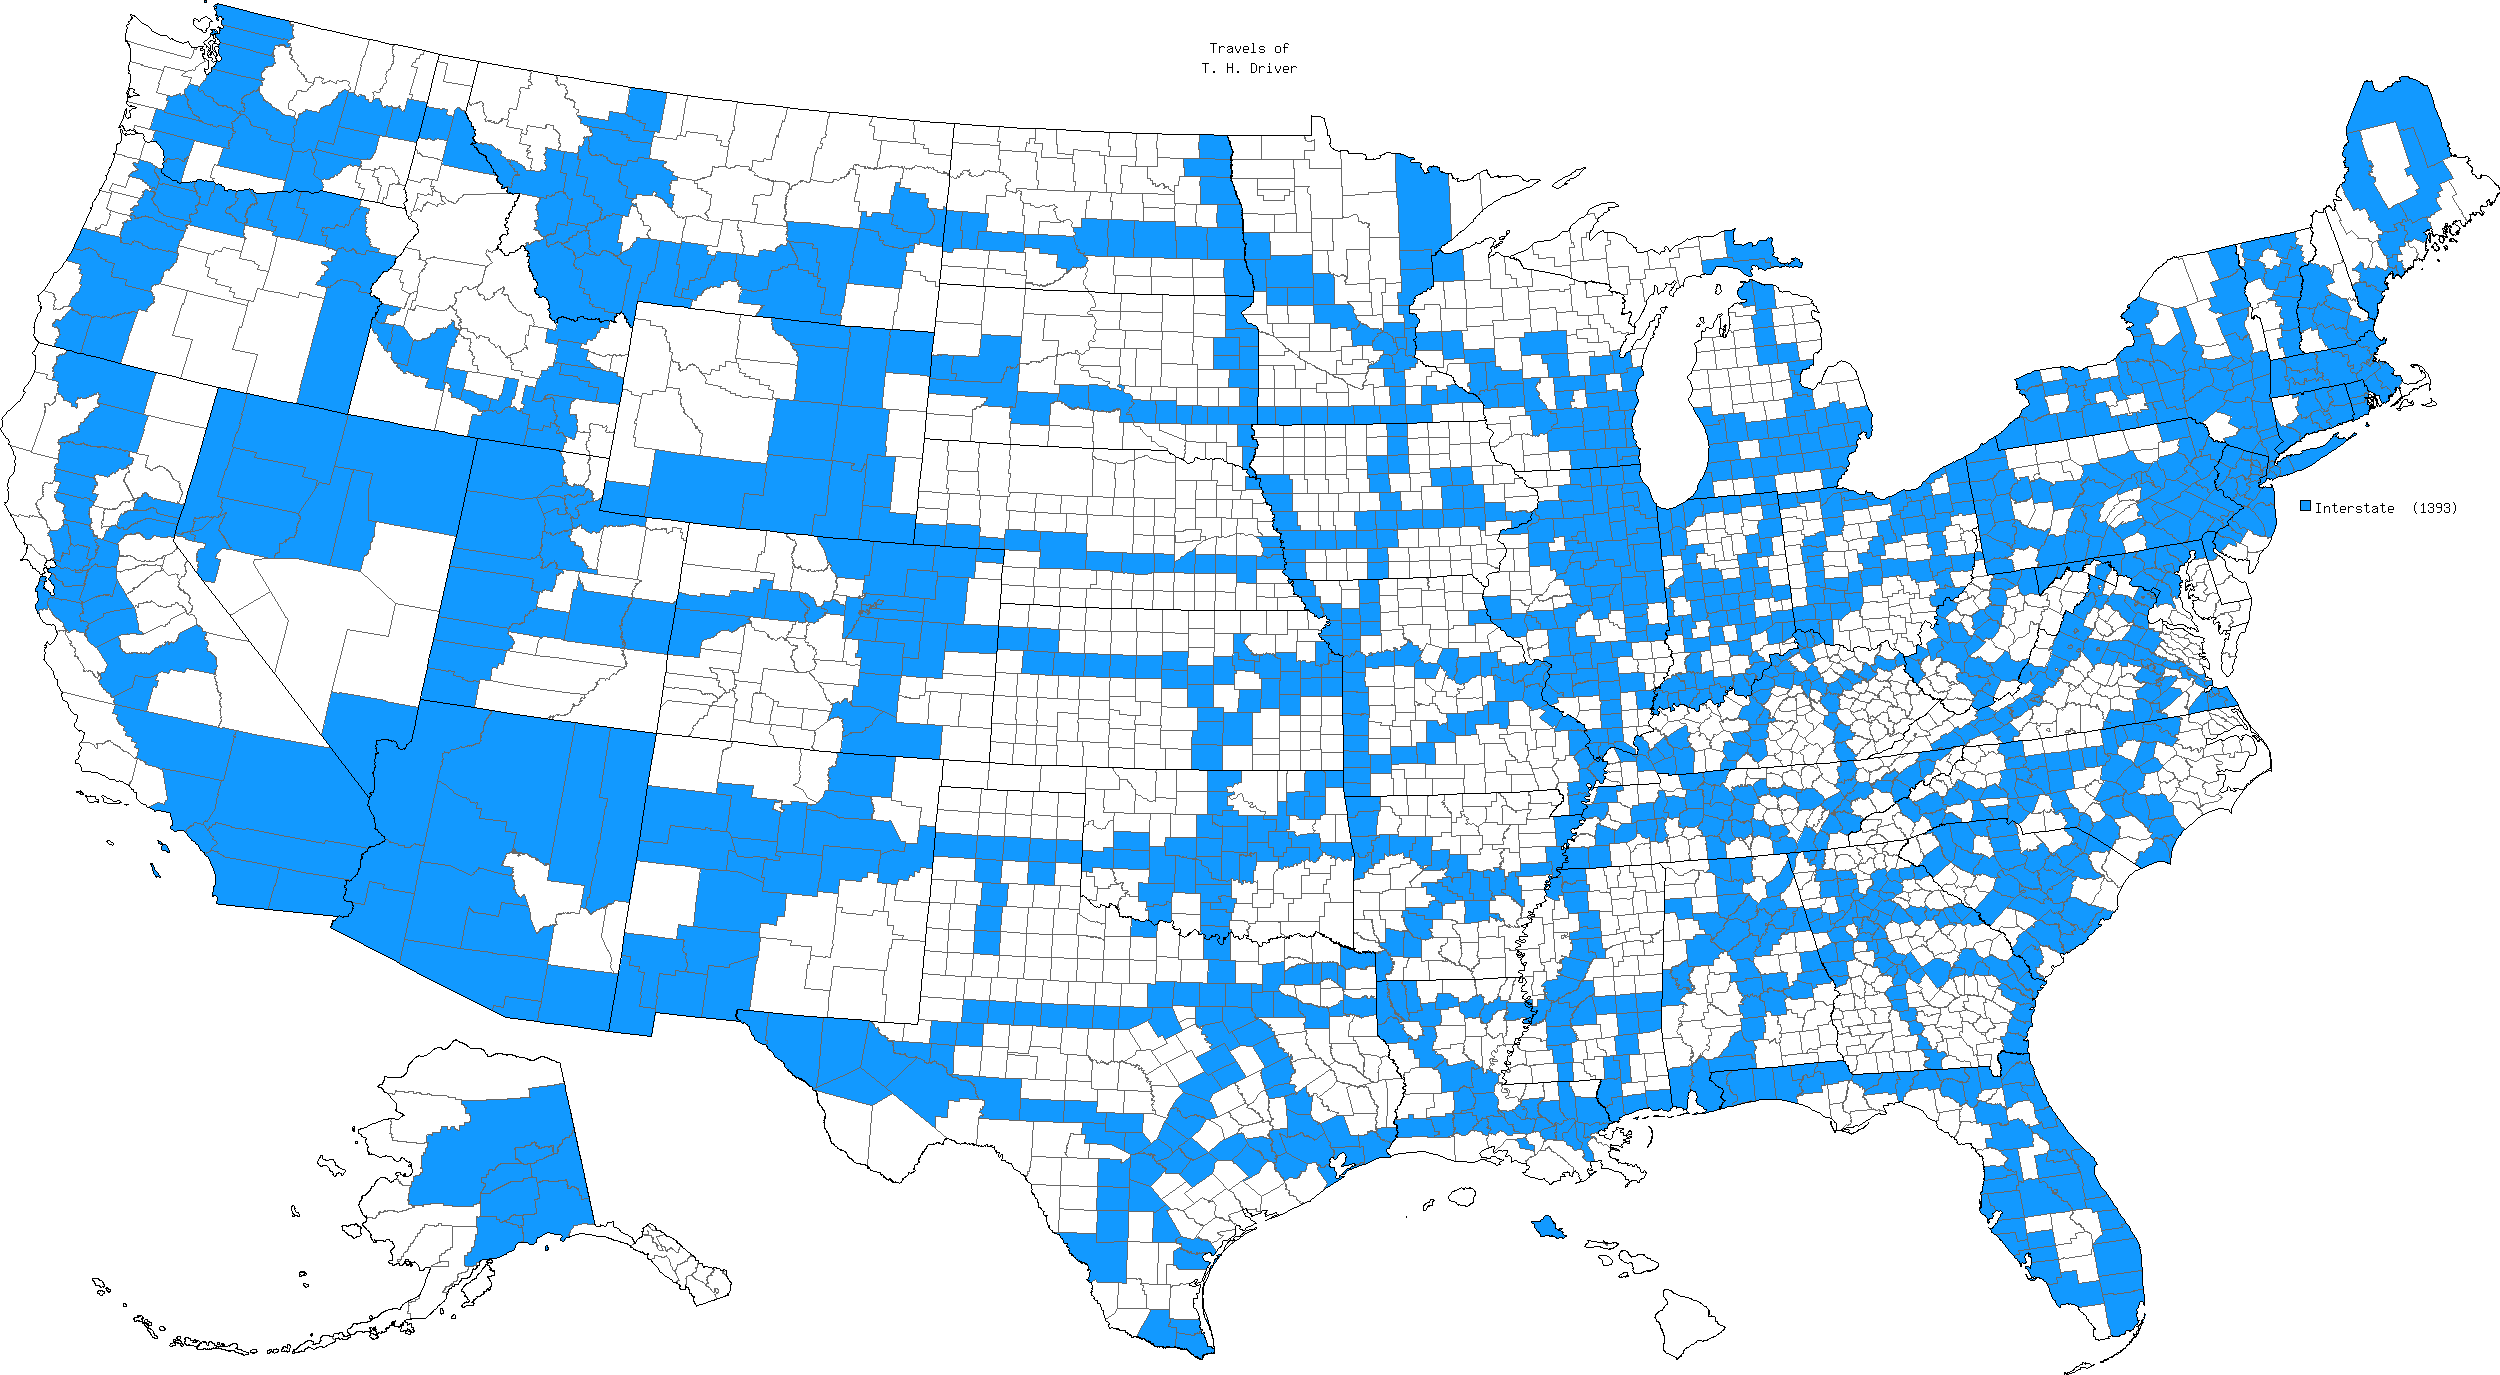 U.S. counties with Interstate Highways. Map generated by mob-rule.com